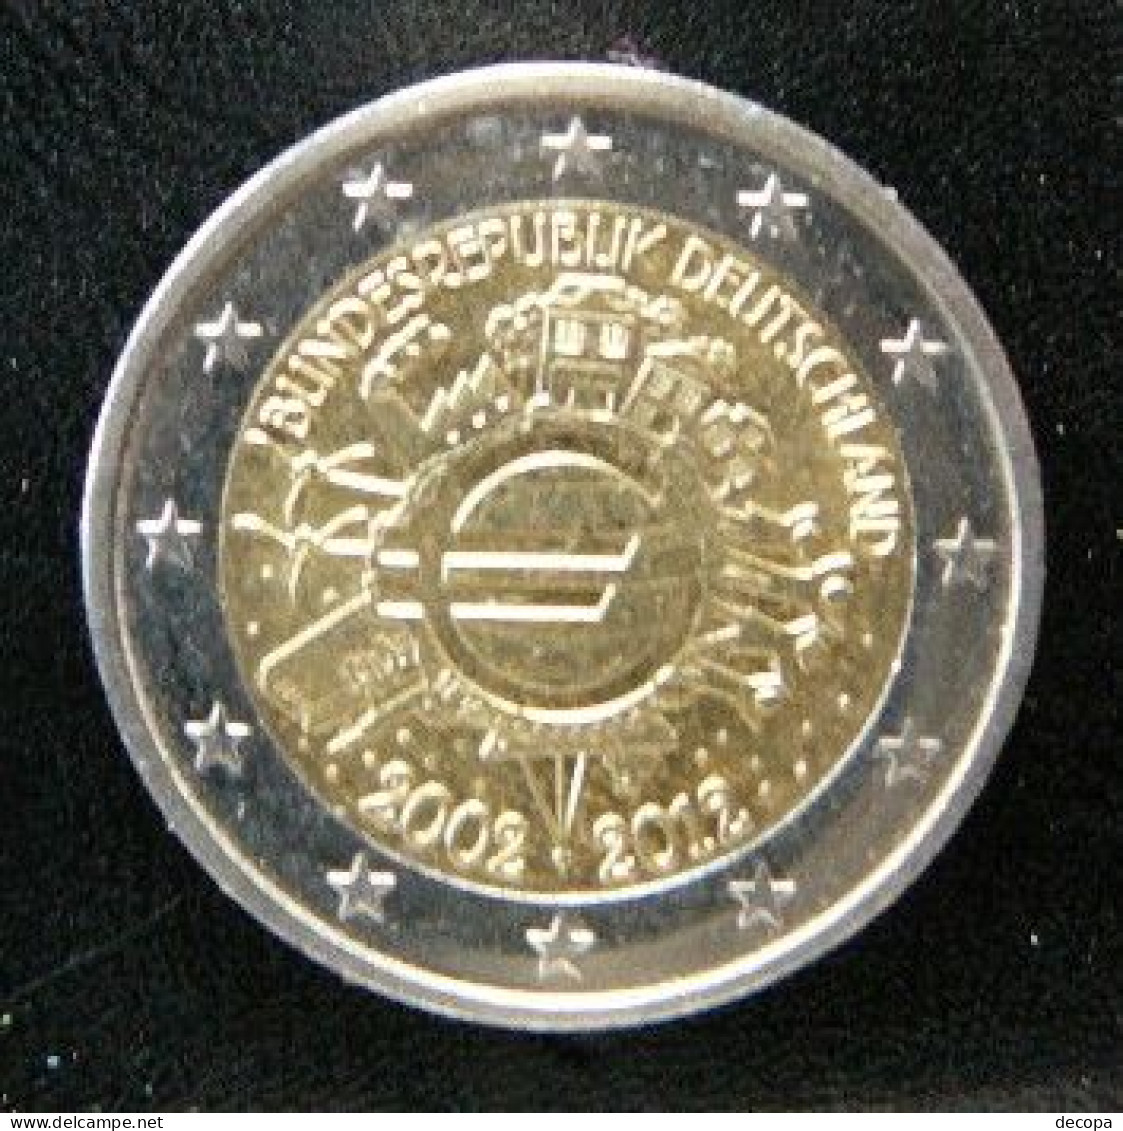 Germany - Allemagne - Duitsland   2 EURO 2012 F   10 Years Euro      Speciale Uitgave - Commemorative - Allemagne